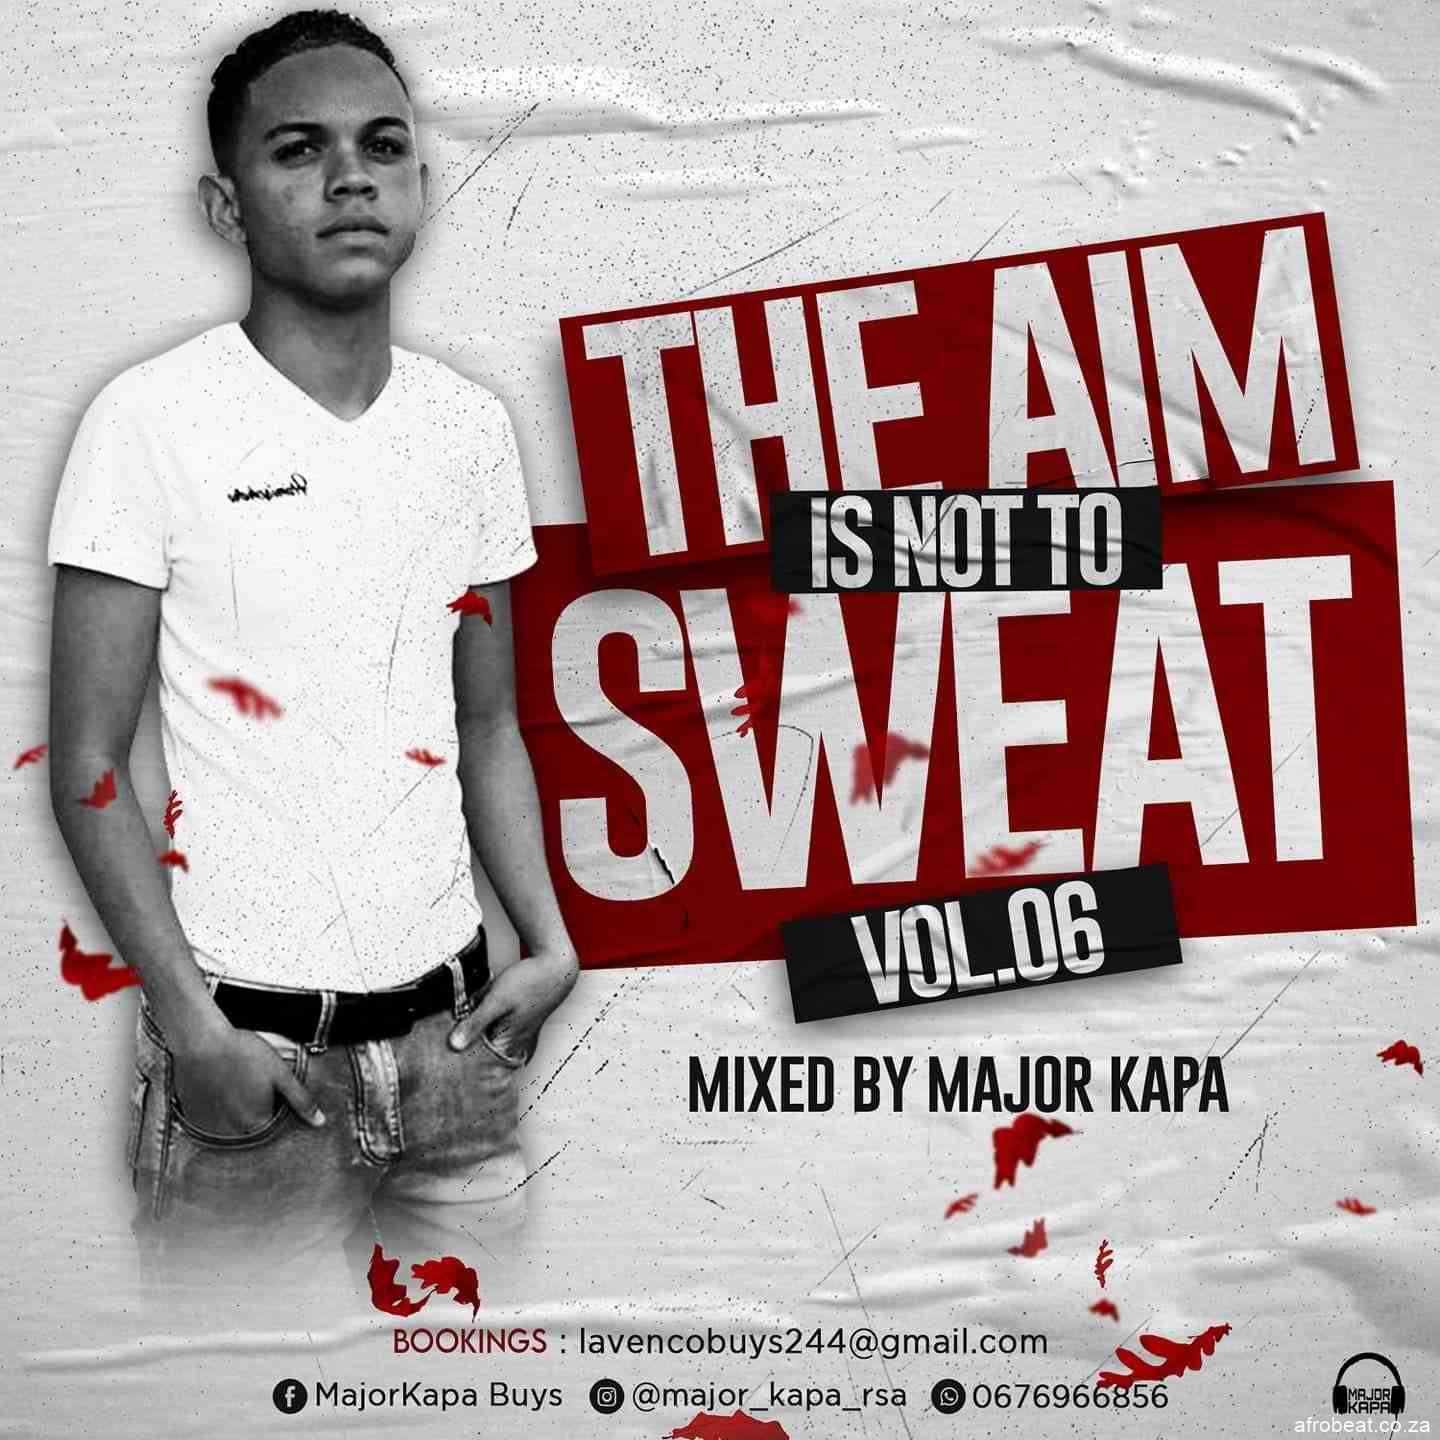 191292742 328044072053765 2091963311002554882 n - Major Kapa – The Aim Is Not To Sweat Vol.06 Mix